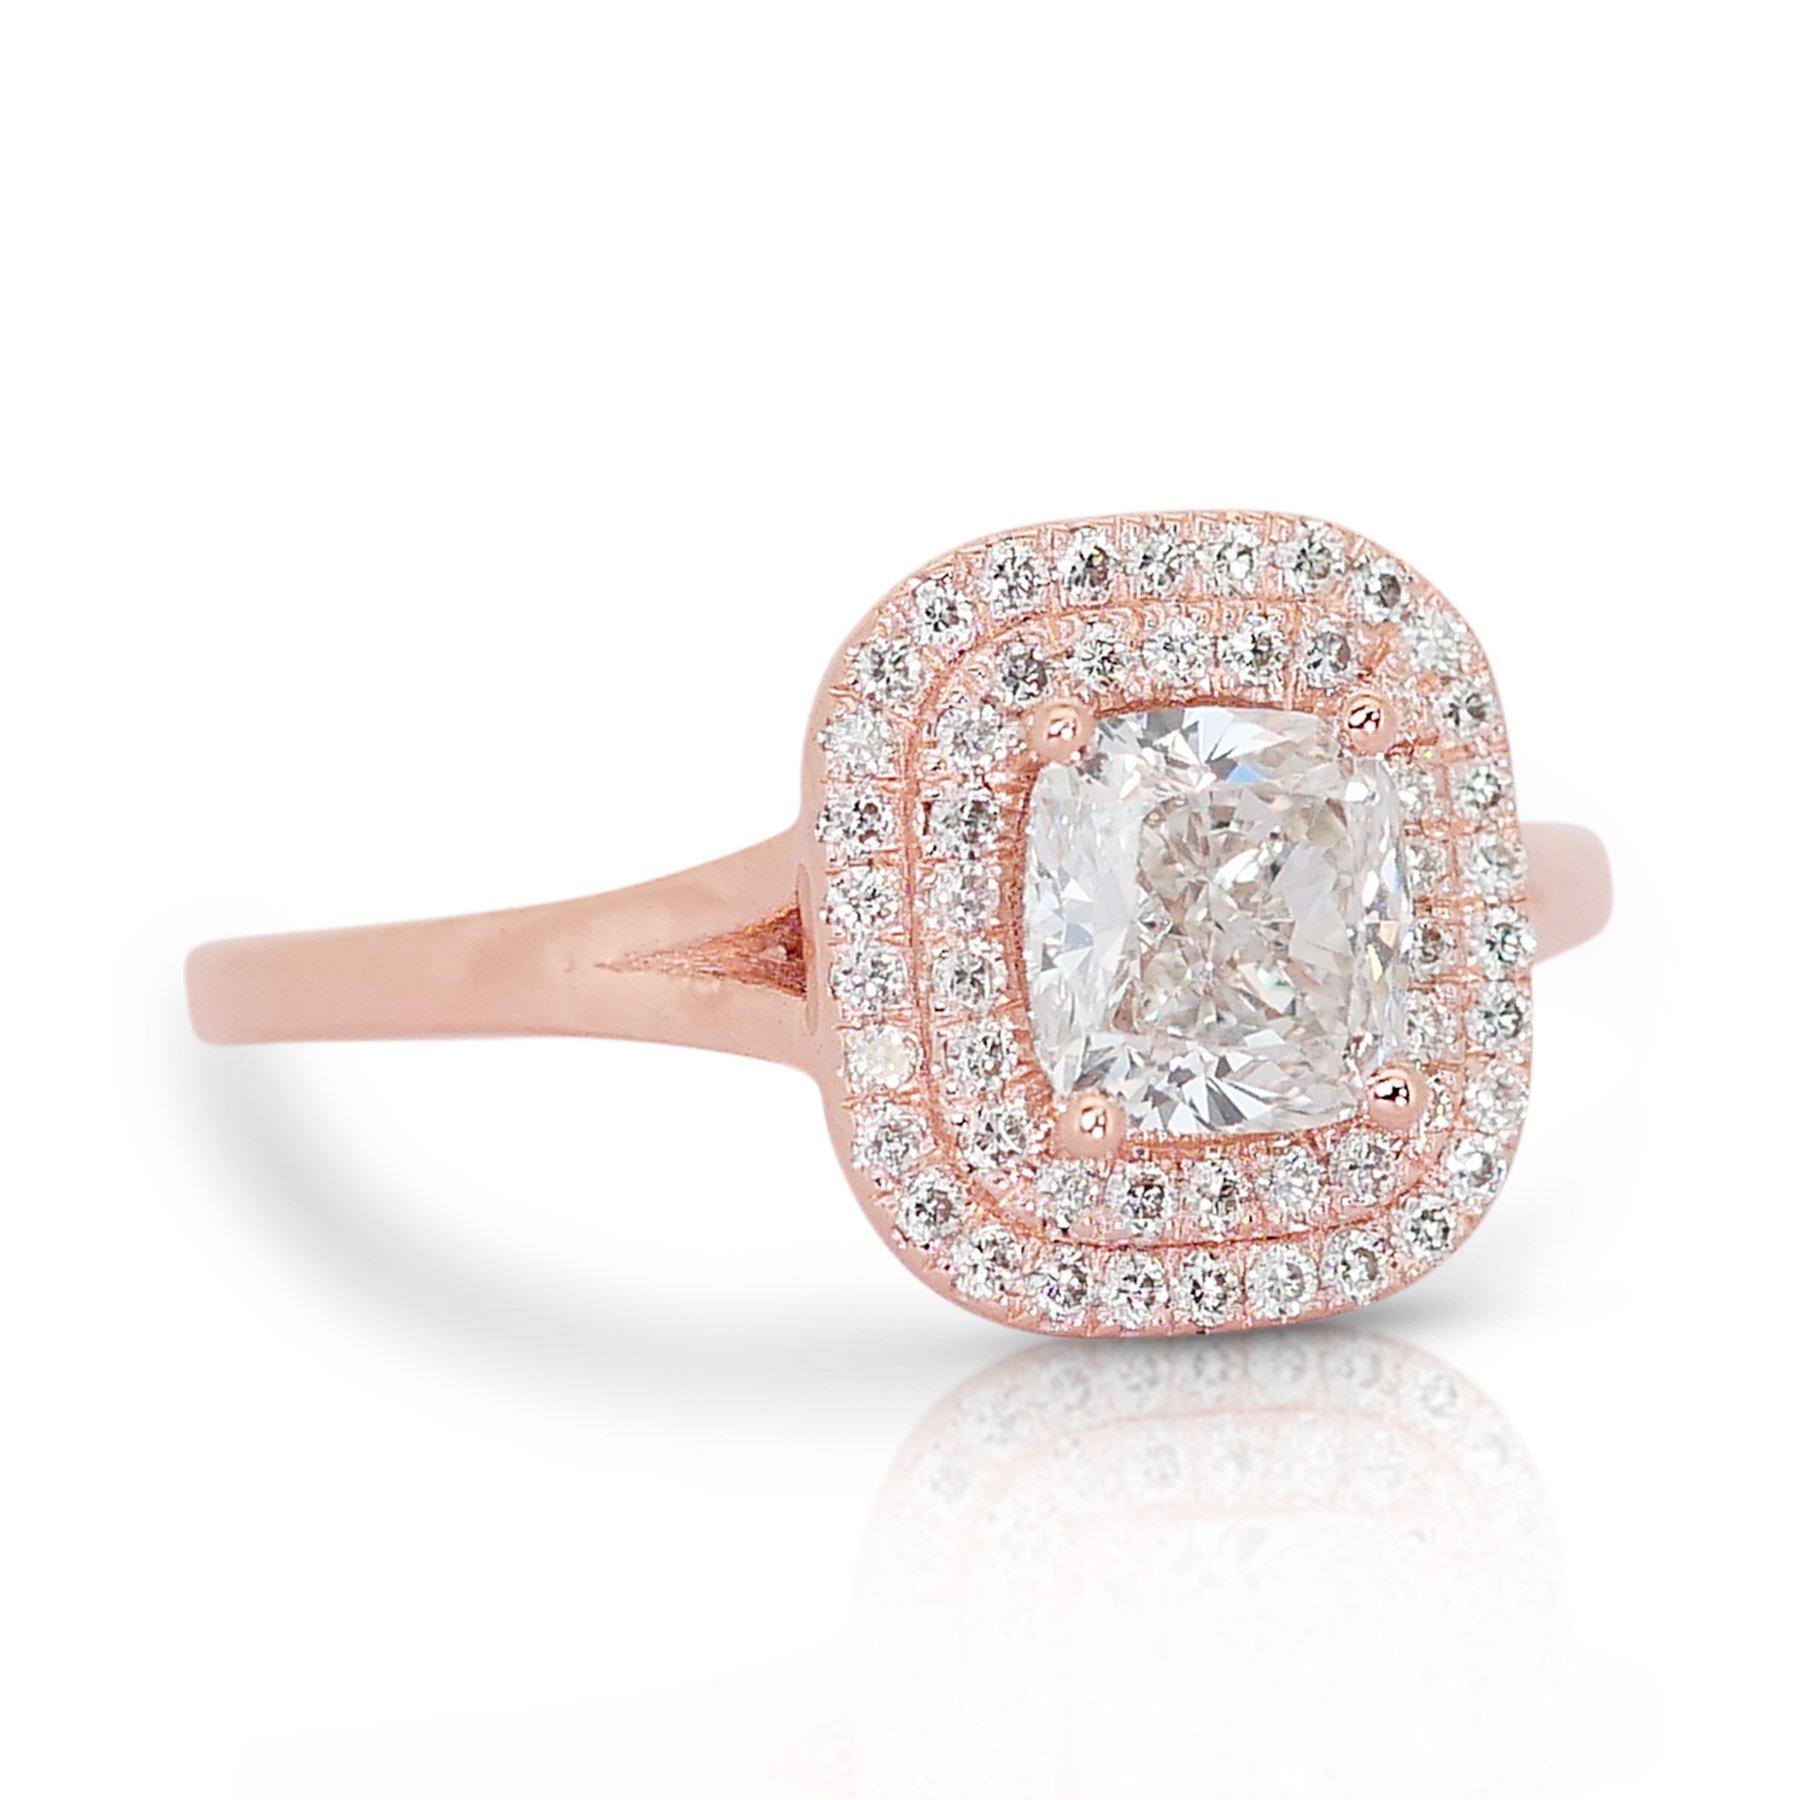 Elegant 1.41ct Diamonds Double Halo Ring in 18k Rose Gold - GIA Certified In New Condition For Sale In רמת גן, IL